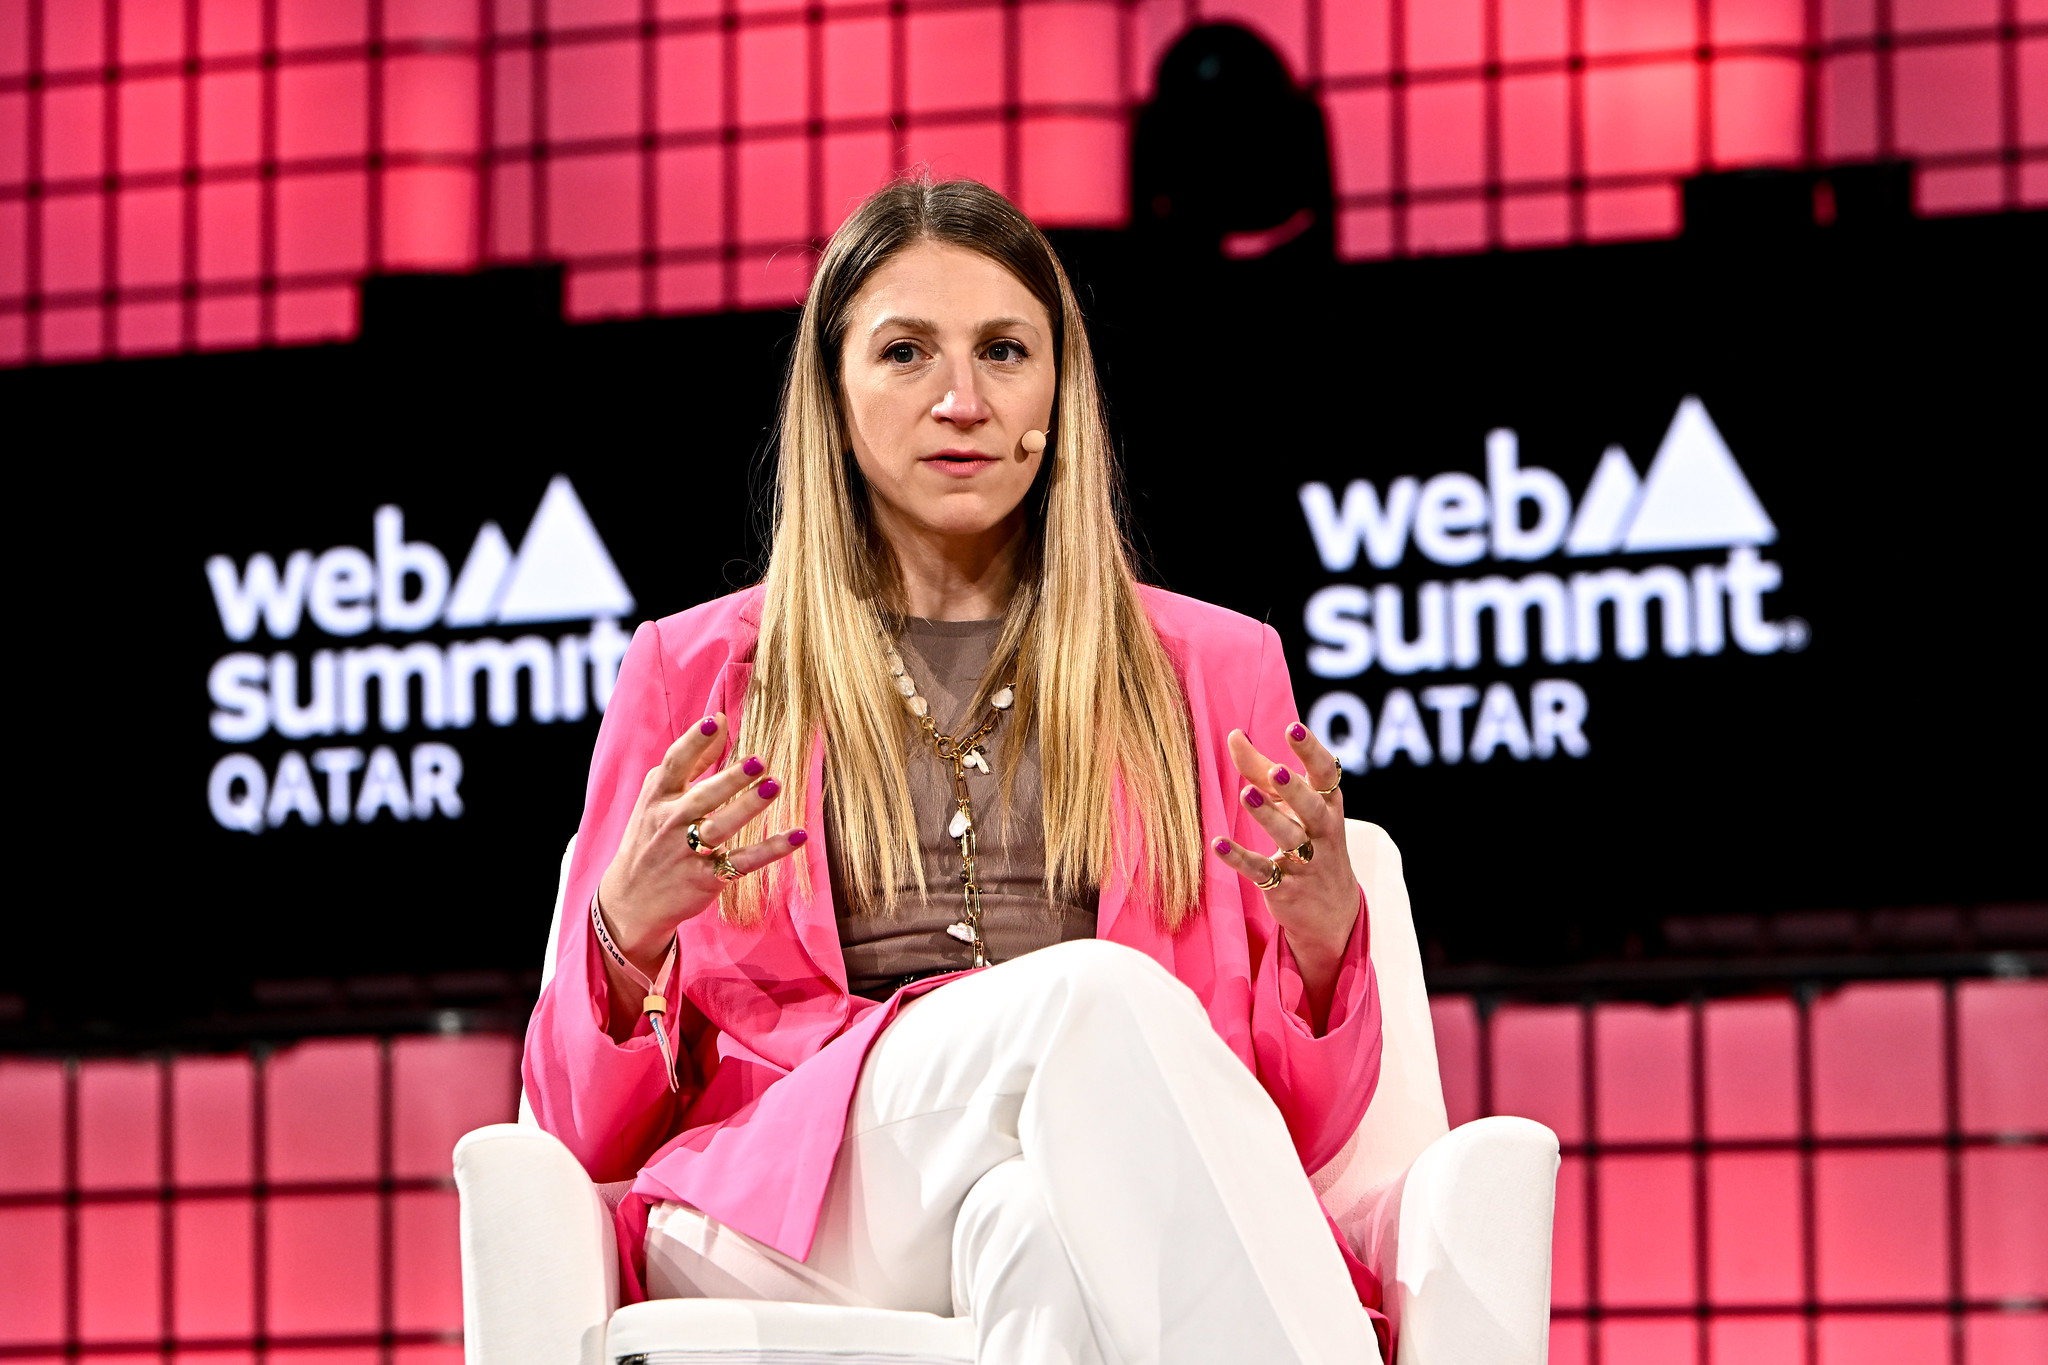 A photo of Aspa Lekka, co-founder of JOKR and executive in residence at Alpine Investors, on Centre Stage during Day 1 of Web Summit Qatar. Aspa is sitting on a chair and gesturing with her hands. She is wearing a headset microphone. The Web Summit Qatar logo is visible in the background.